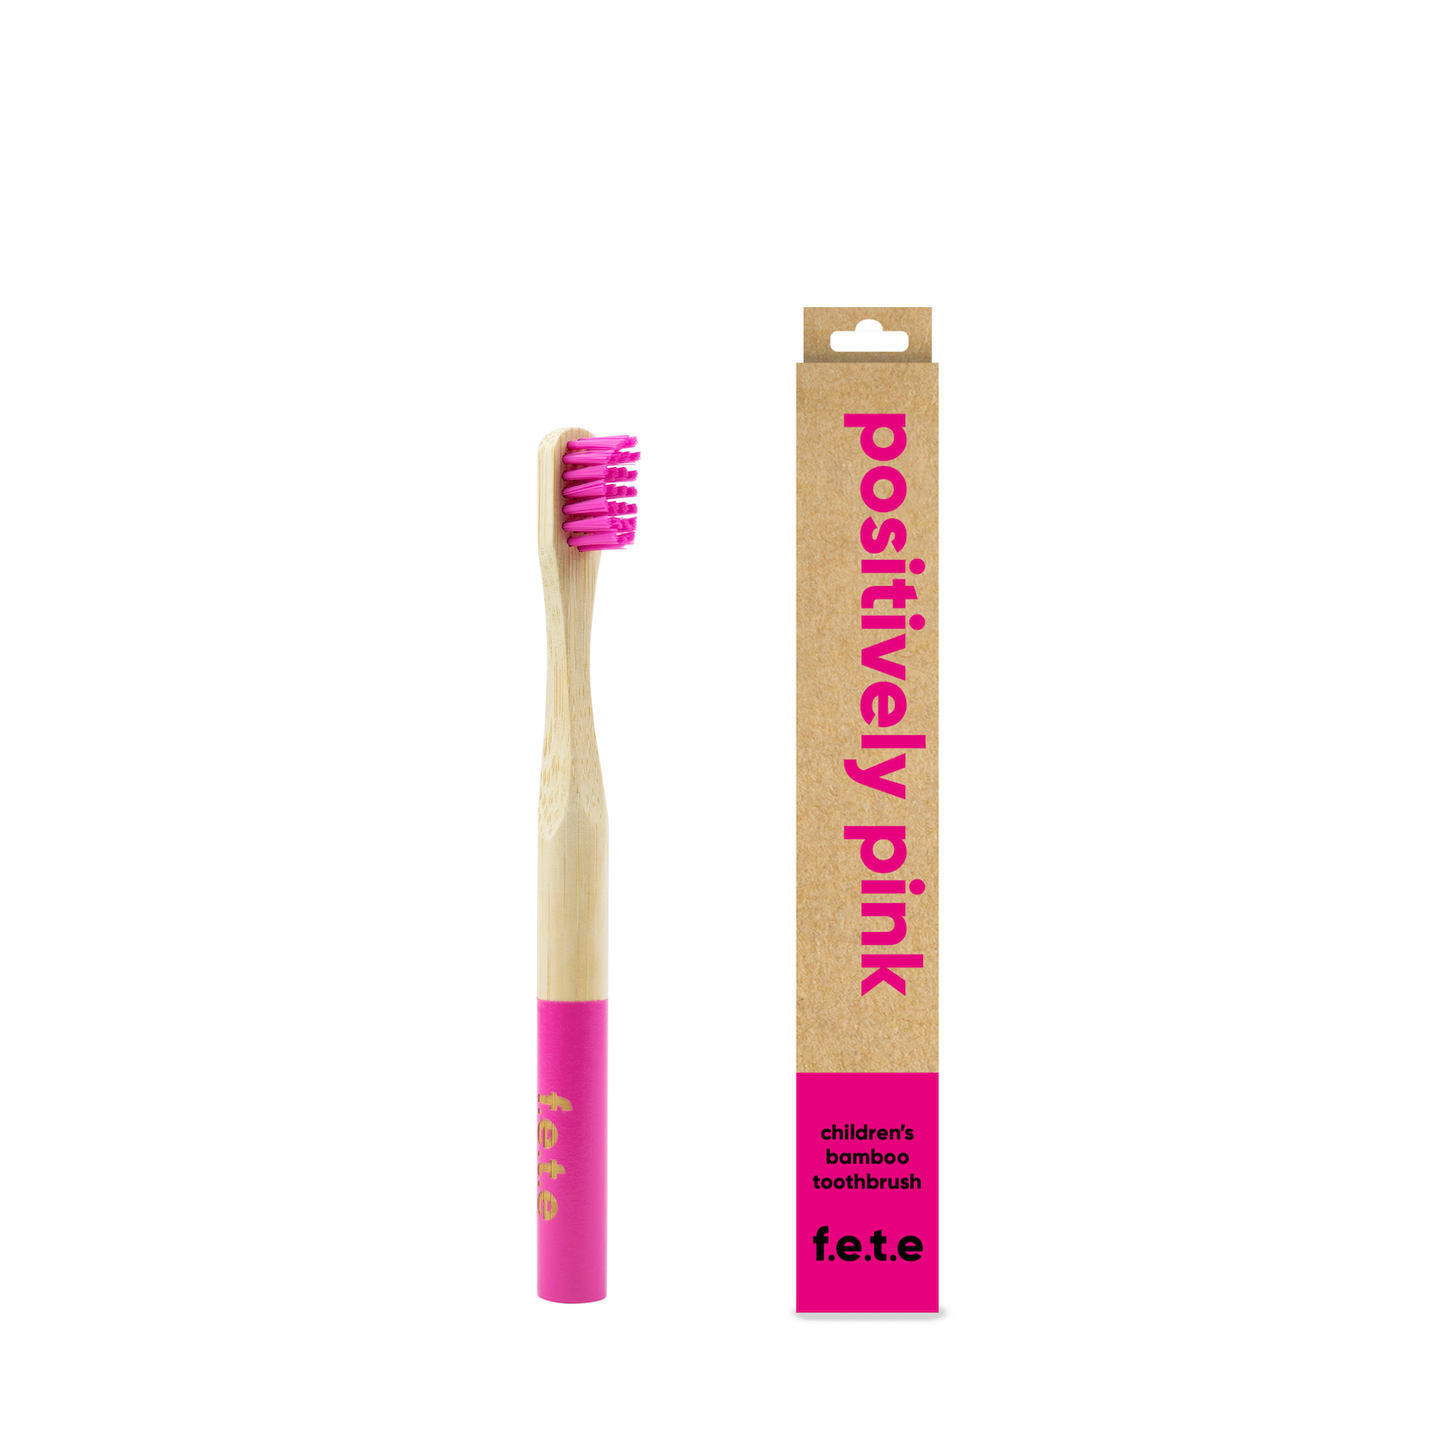 ‘Positively Pink’ Children’s Soft Bamboo Toothbrush